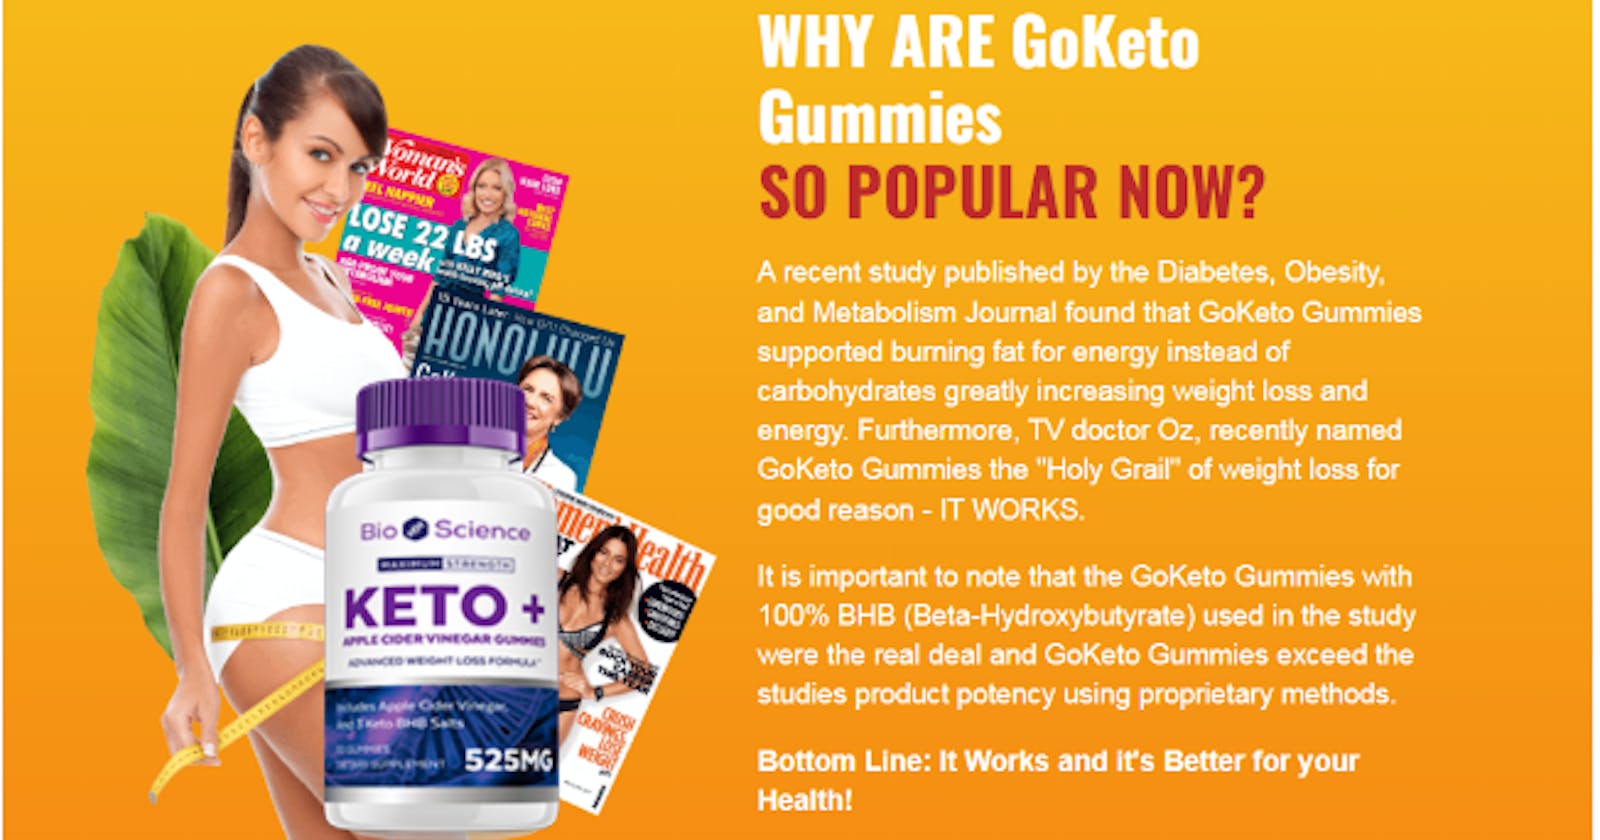 BioScience Keto Gummies Scam – (FAKE NEWS) IS IT SCAM OR TRUSTED A Guide to Transforming Your Body and Your Mind for Life?